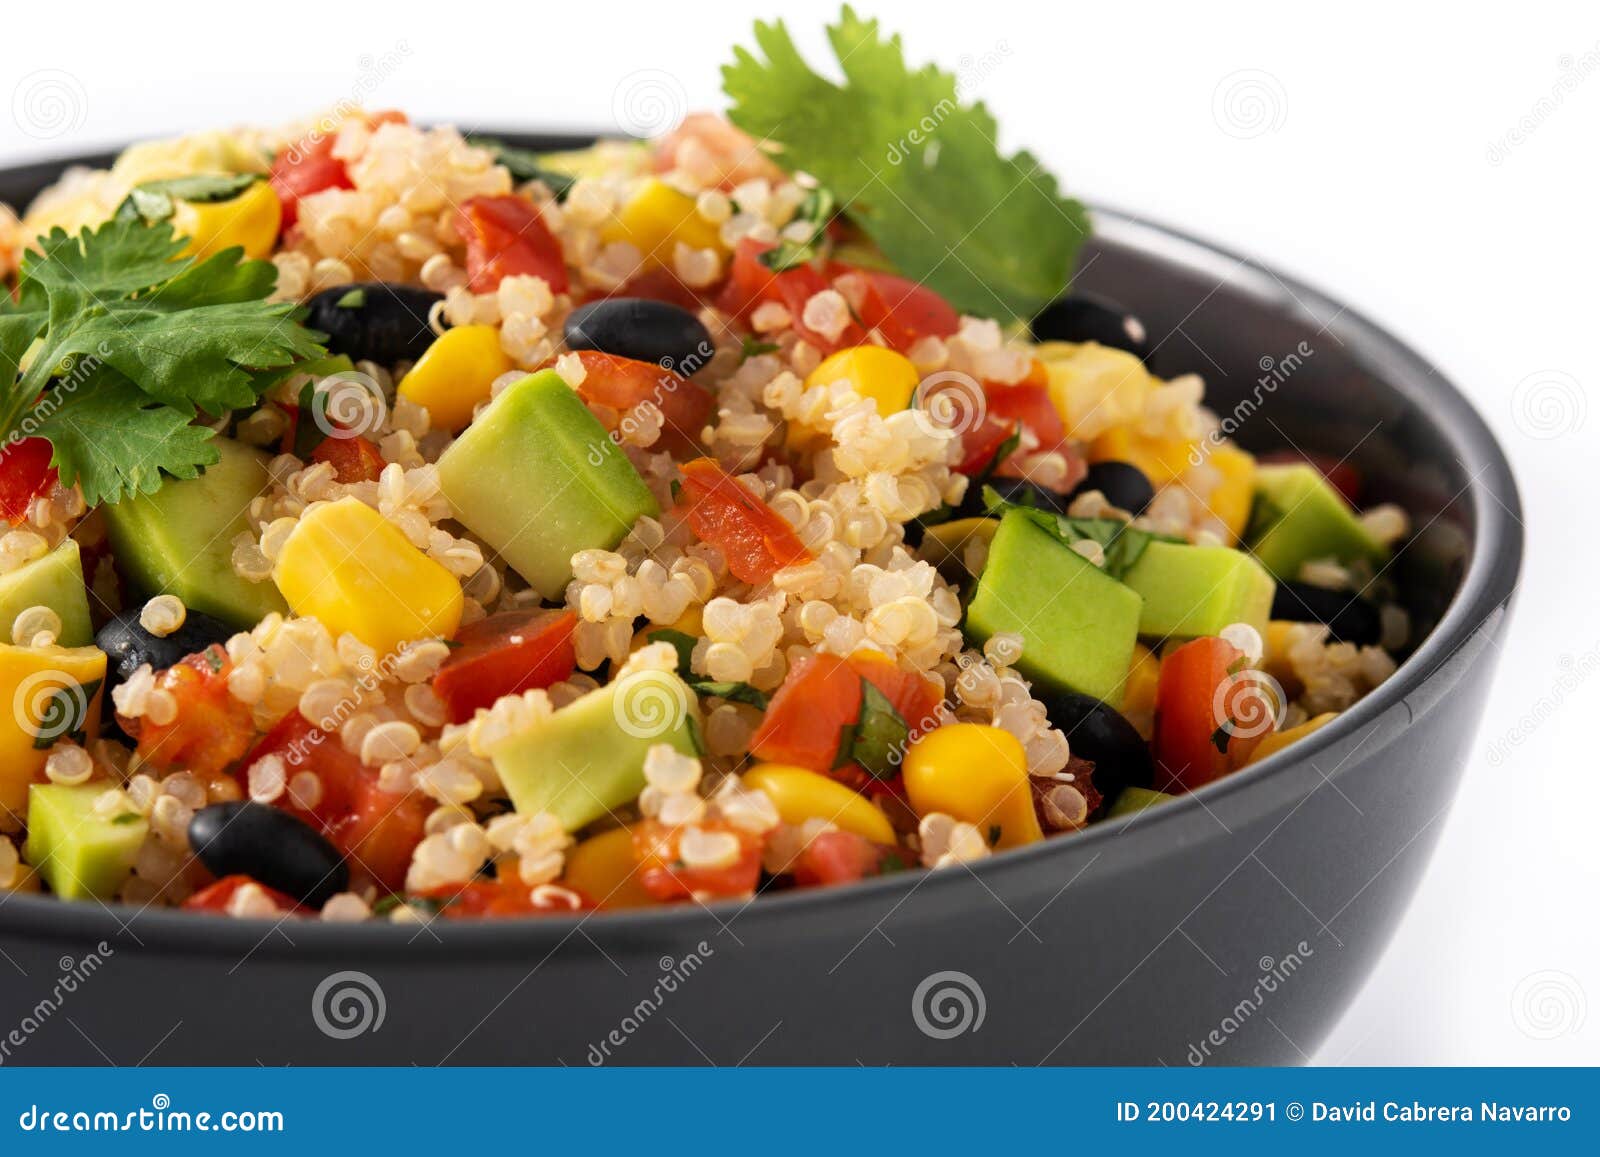 mexican salad with quinua in bowl.close up